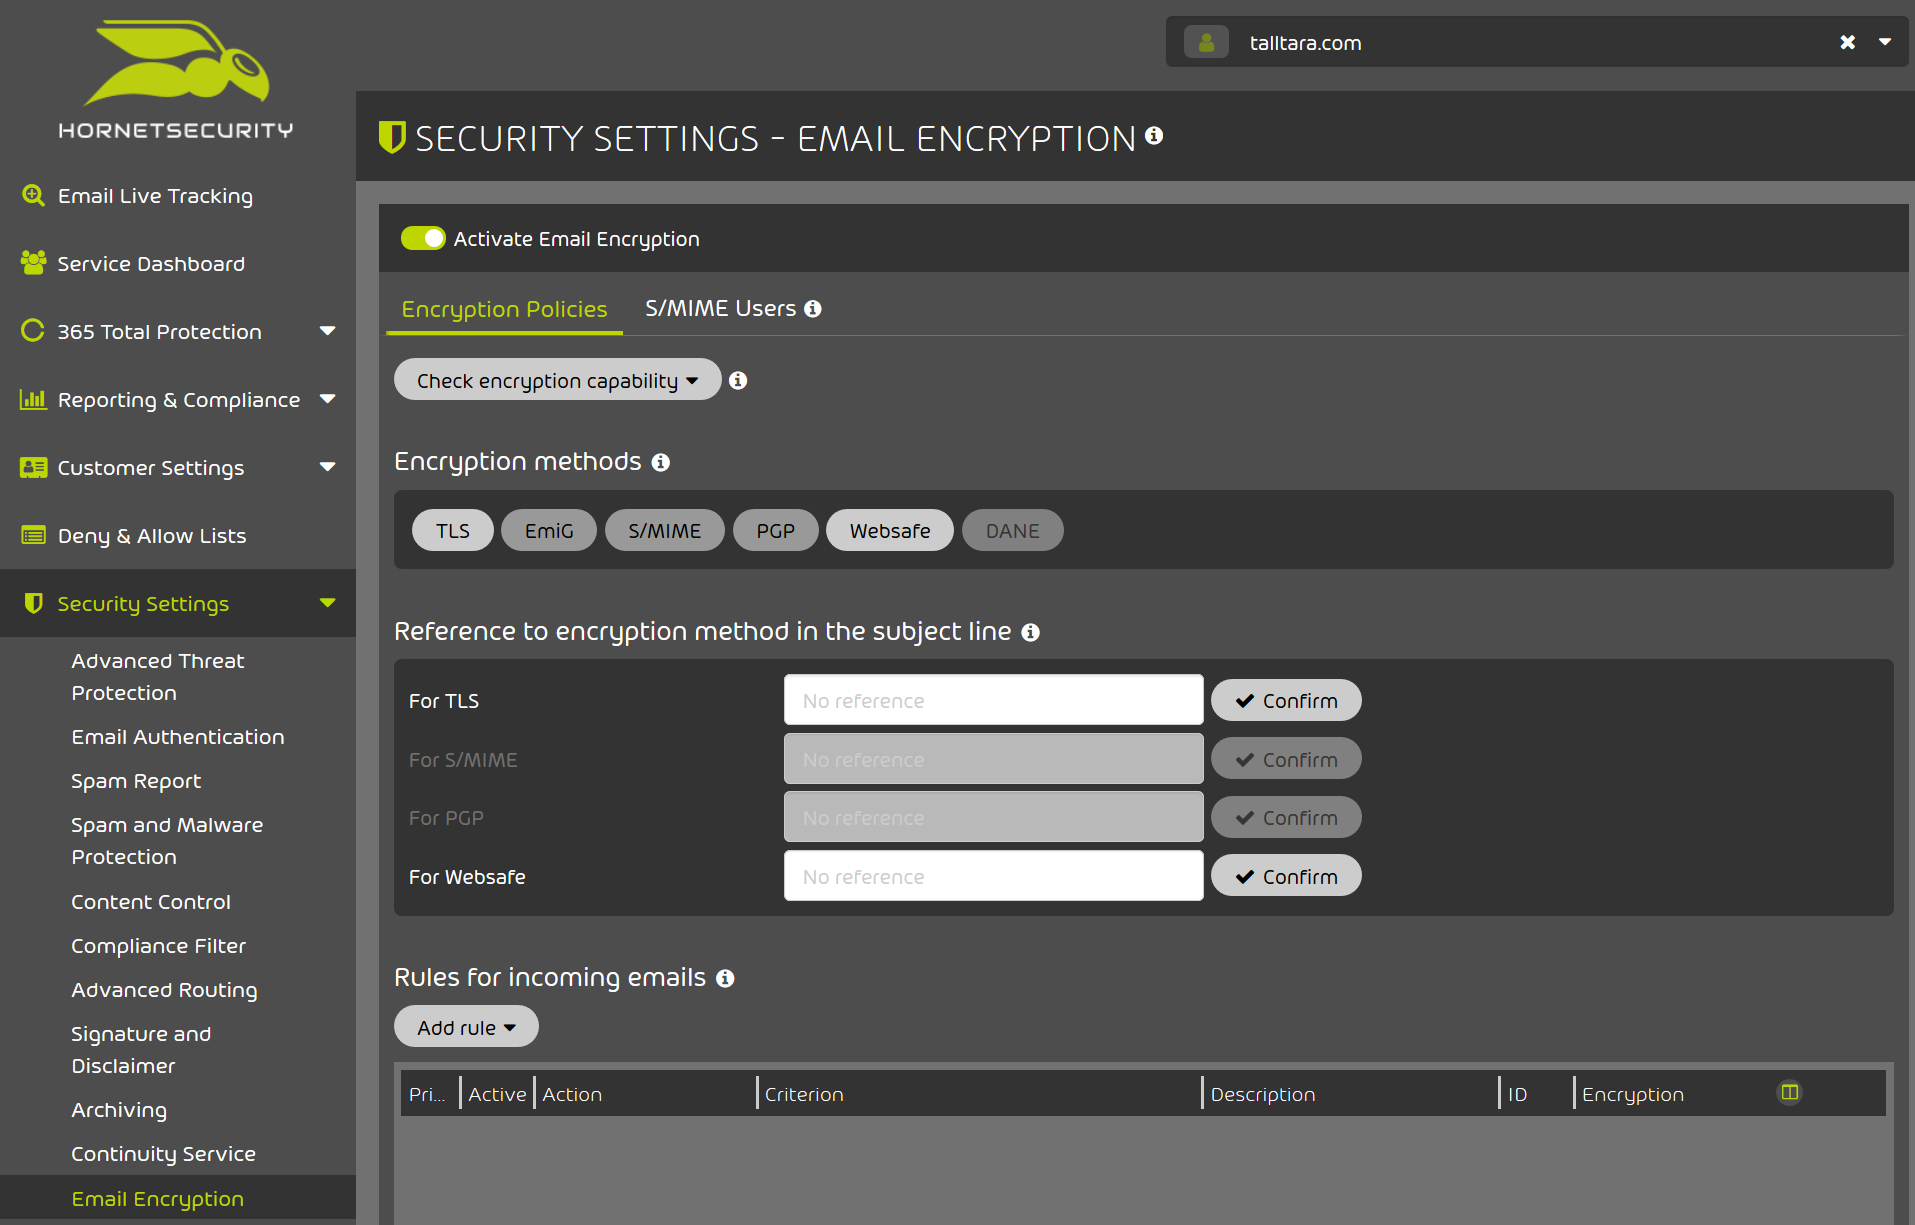 Email Archiving - Easy Email certificate management in the Horntesecurity Control Panel